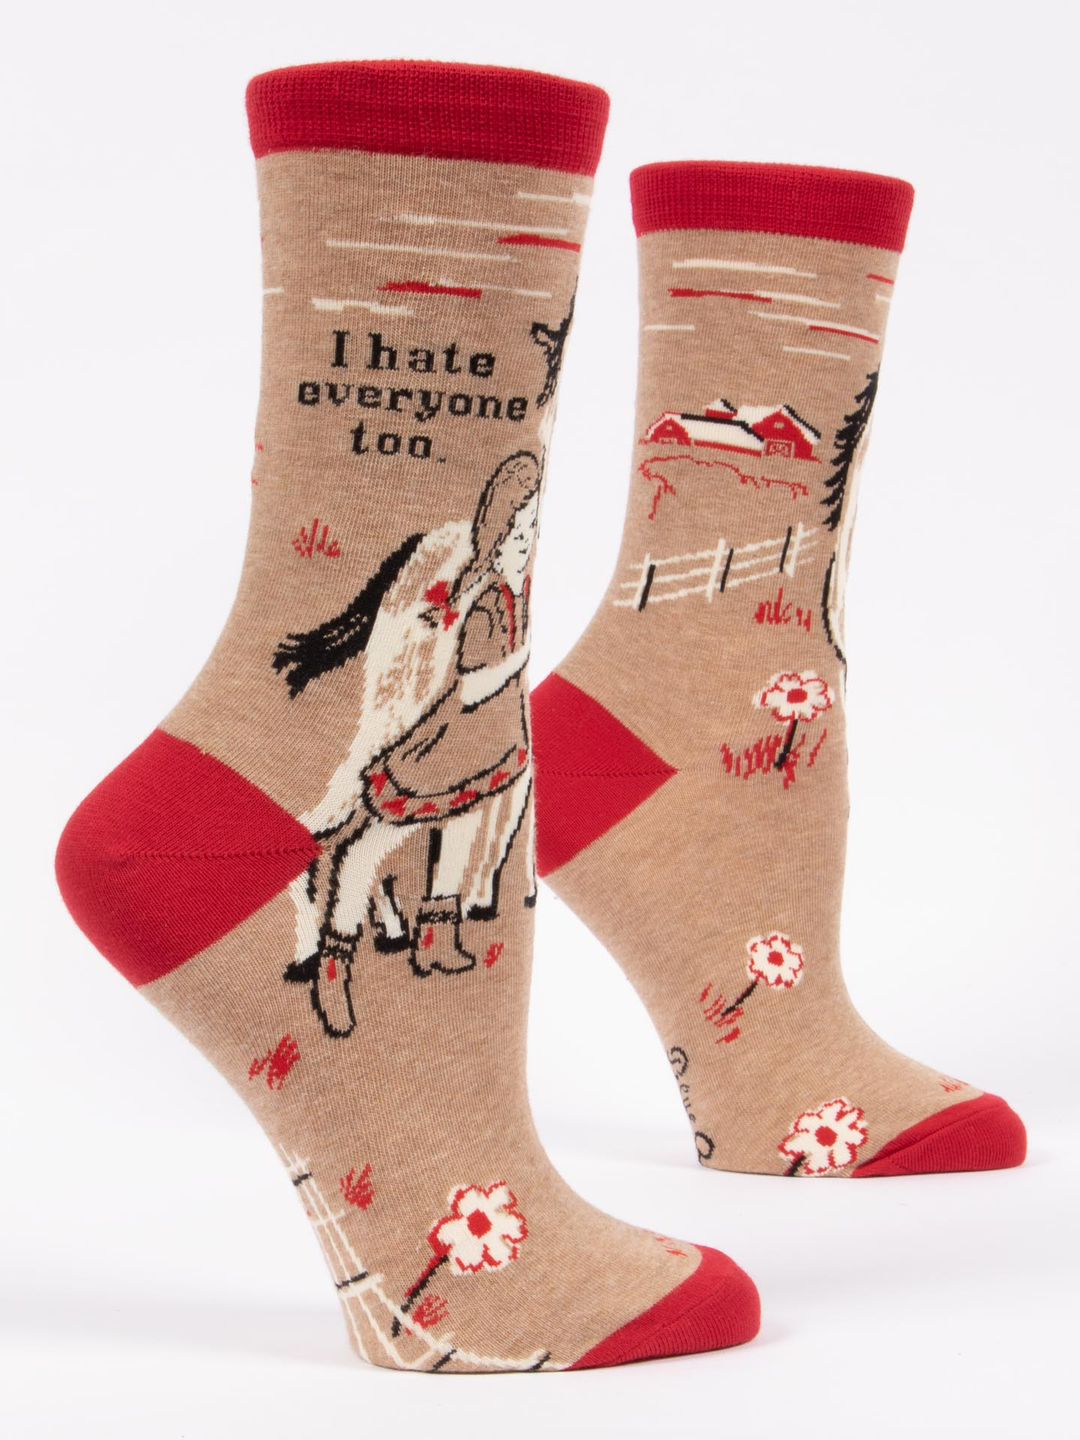 I Hate Everyone Too Women's Crew Socks - Kingfisher Road - Online Boutique